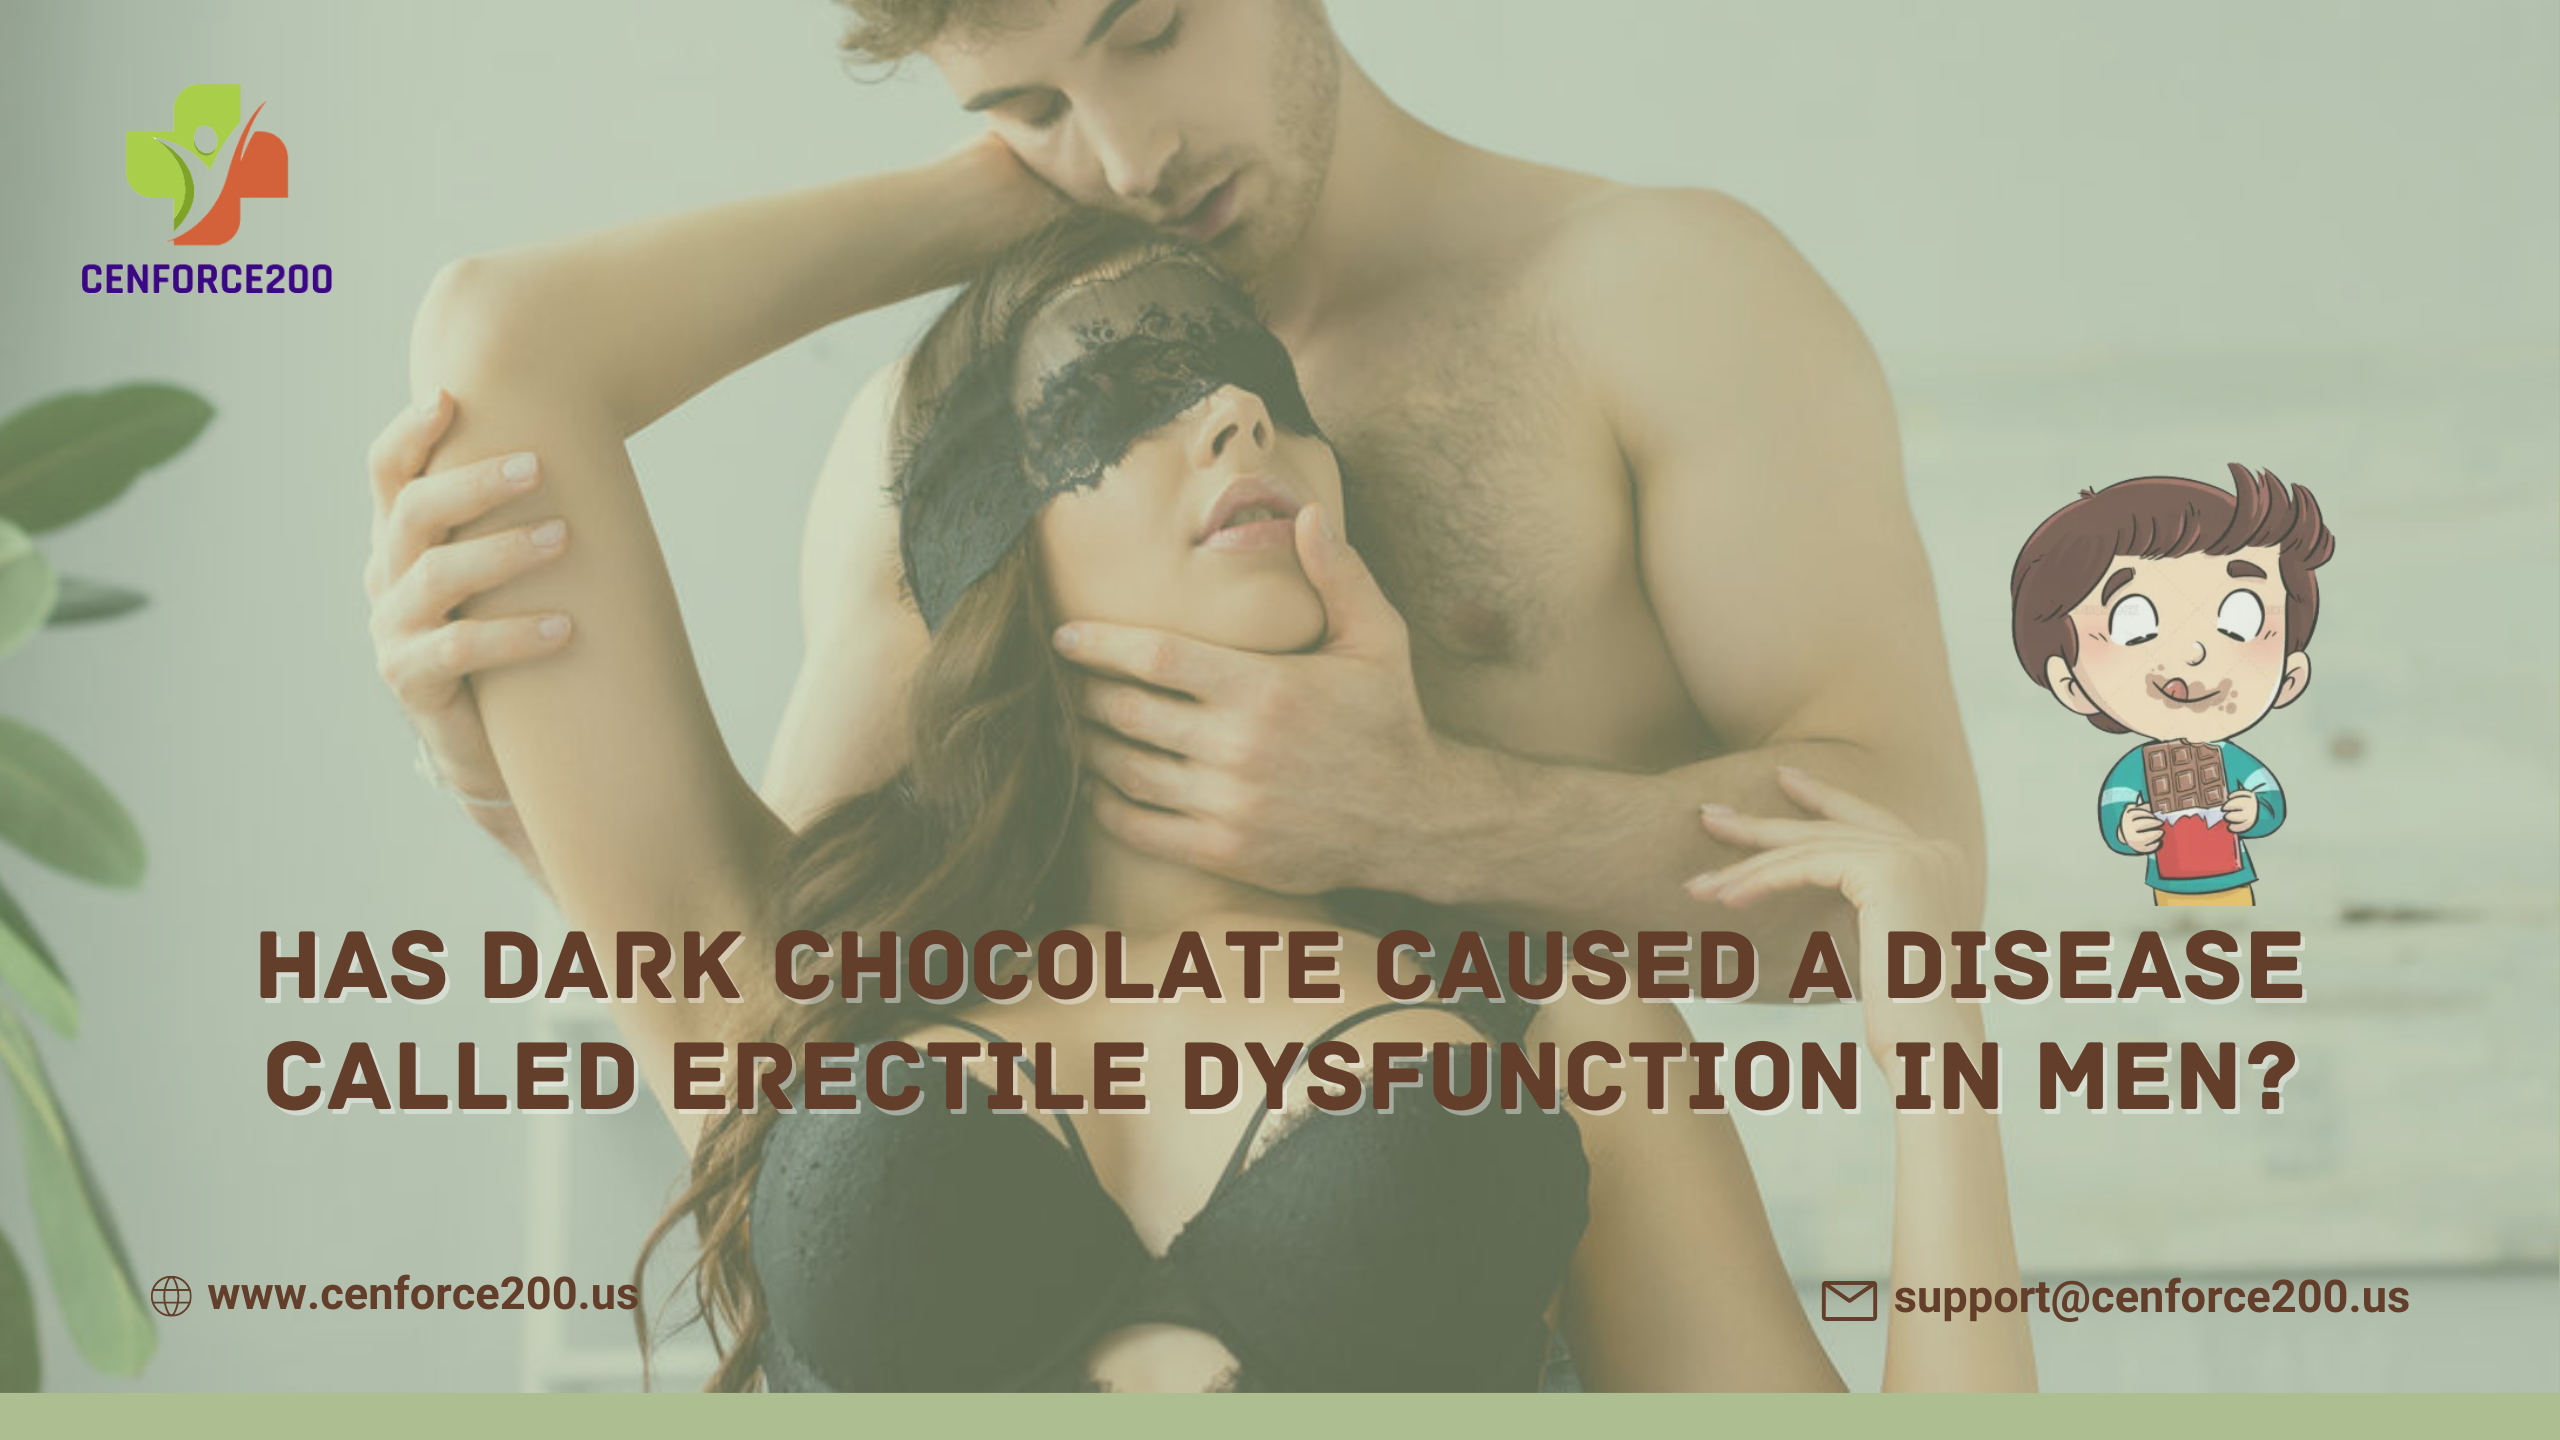 Has Dark Chocolate Caused a Disease Called Erectile Dysfunction In Men?